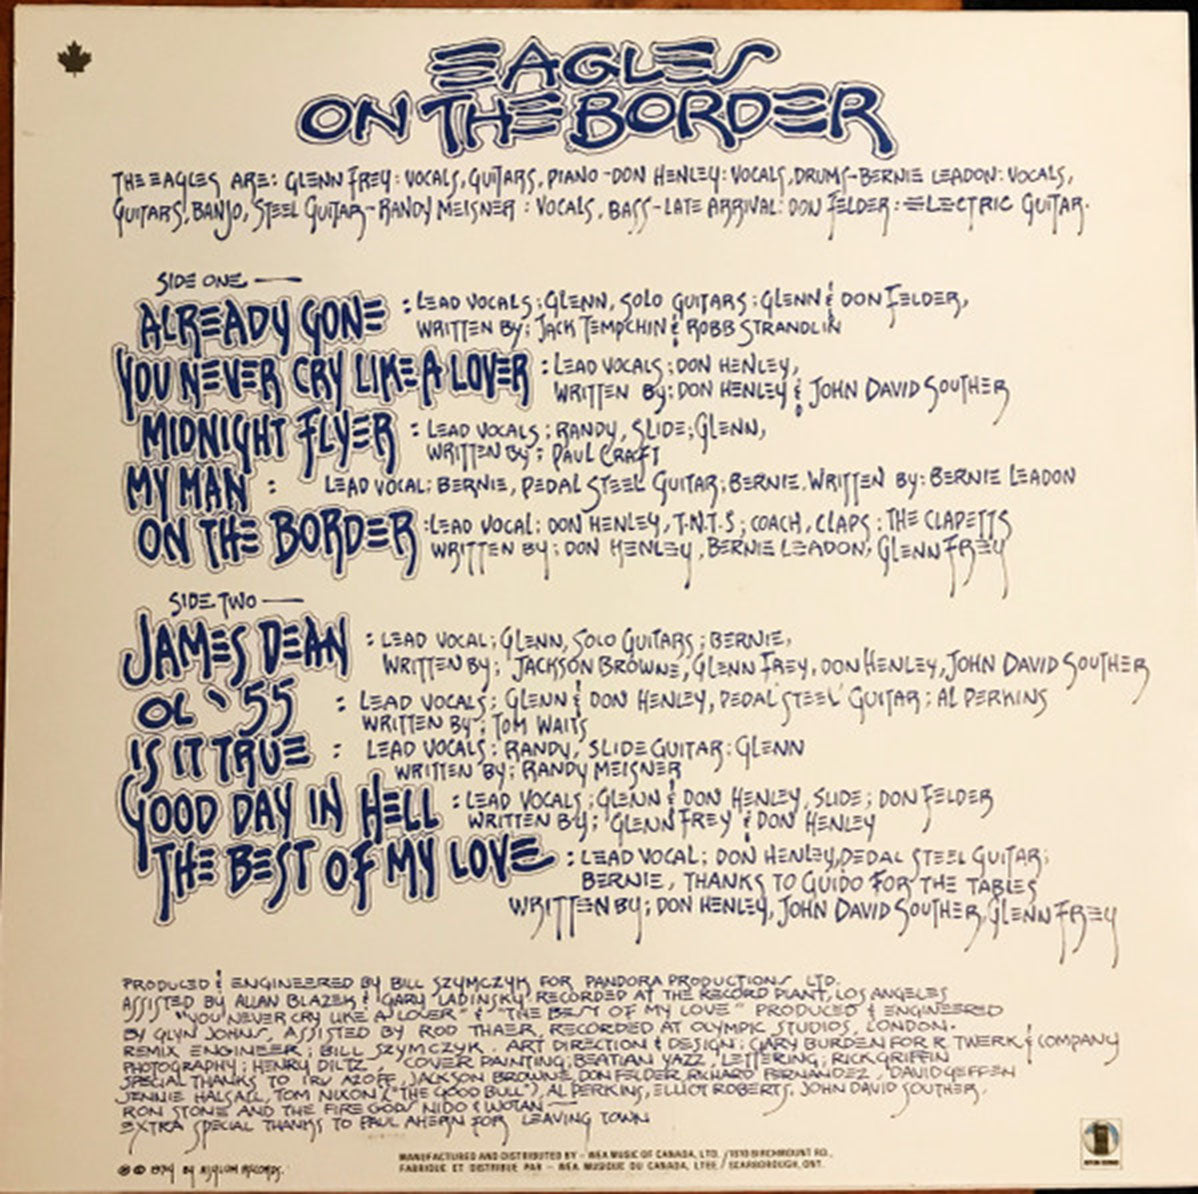 Eagles – On The Border - 1974